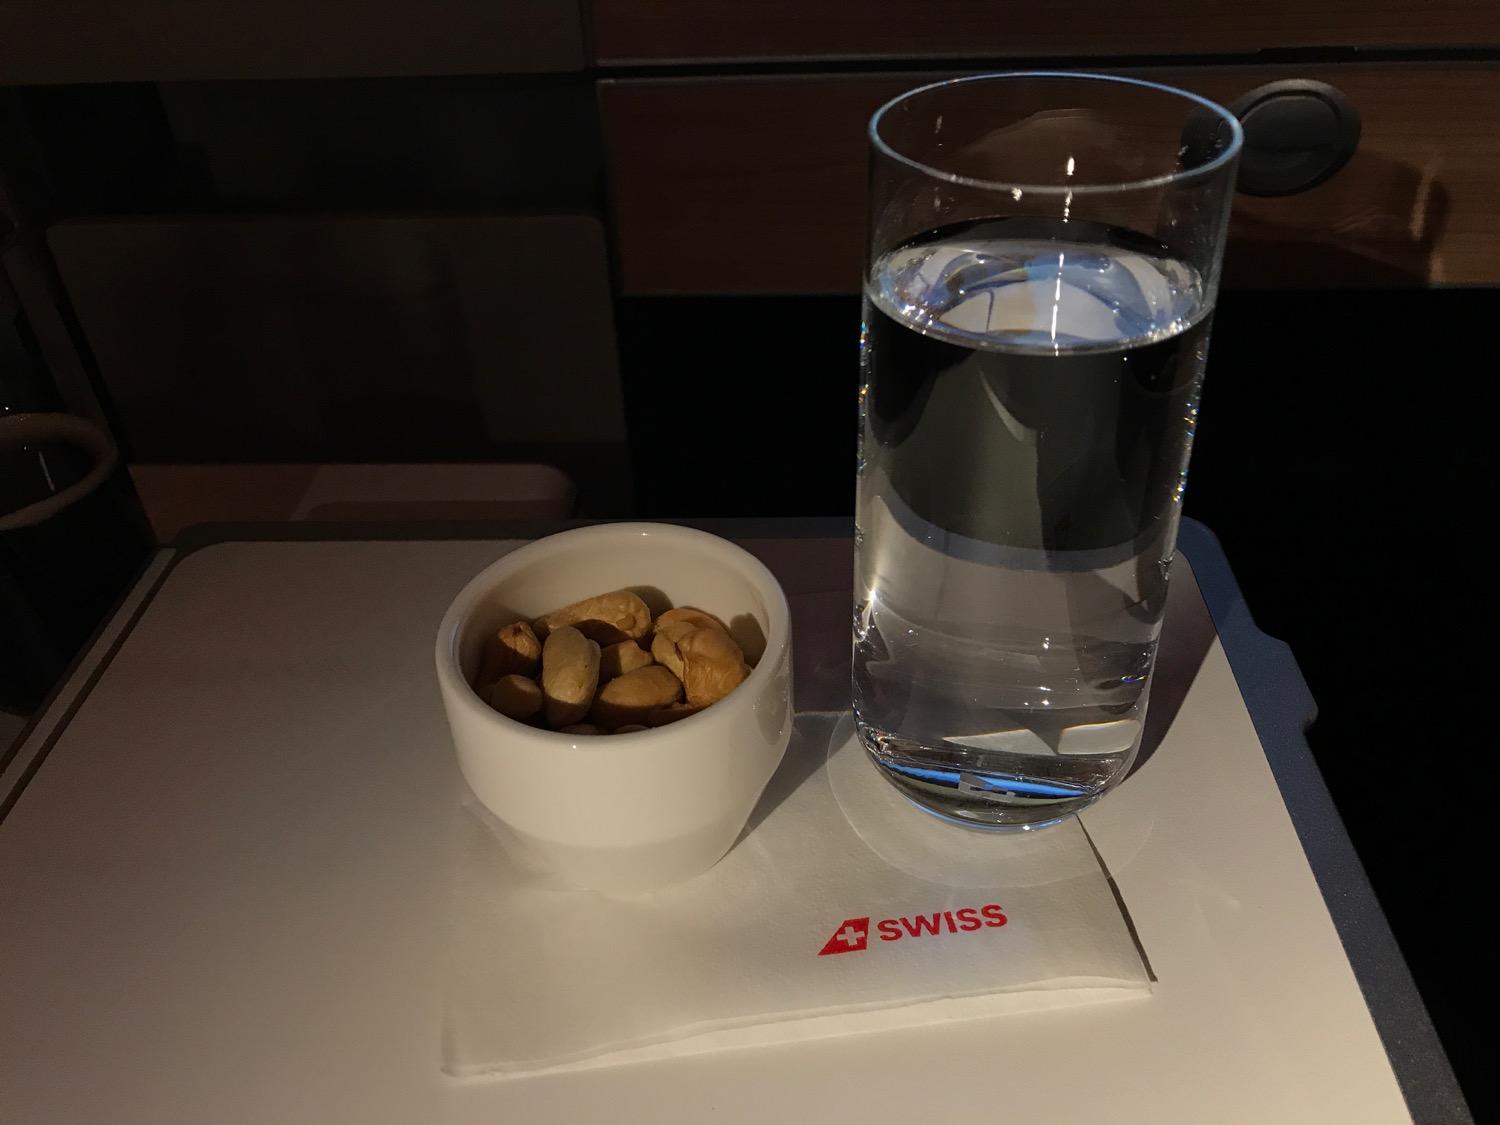 a glass of water and a bowl of peanuts on a table